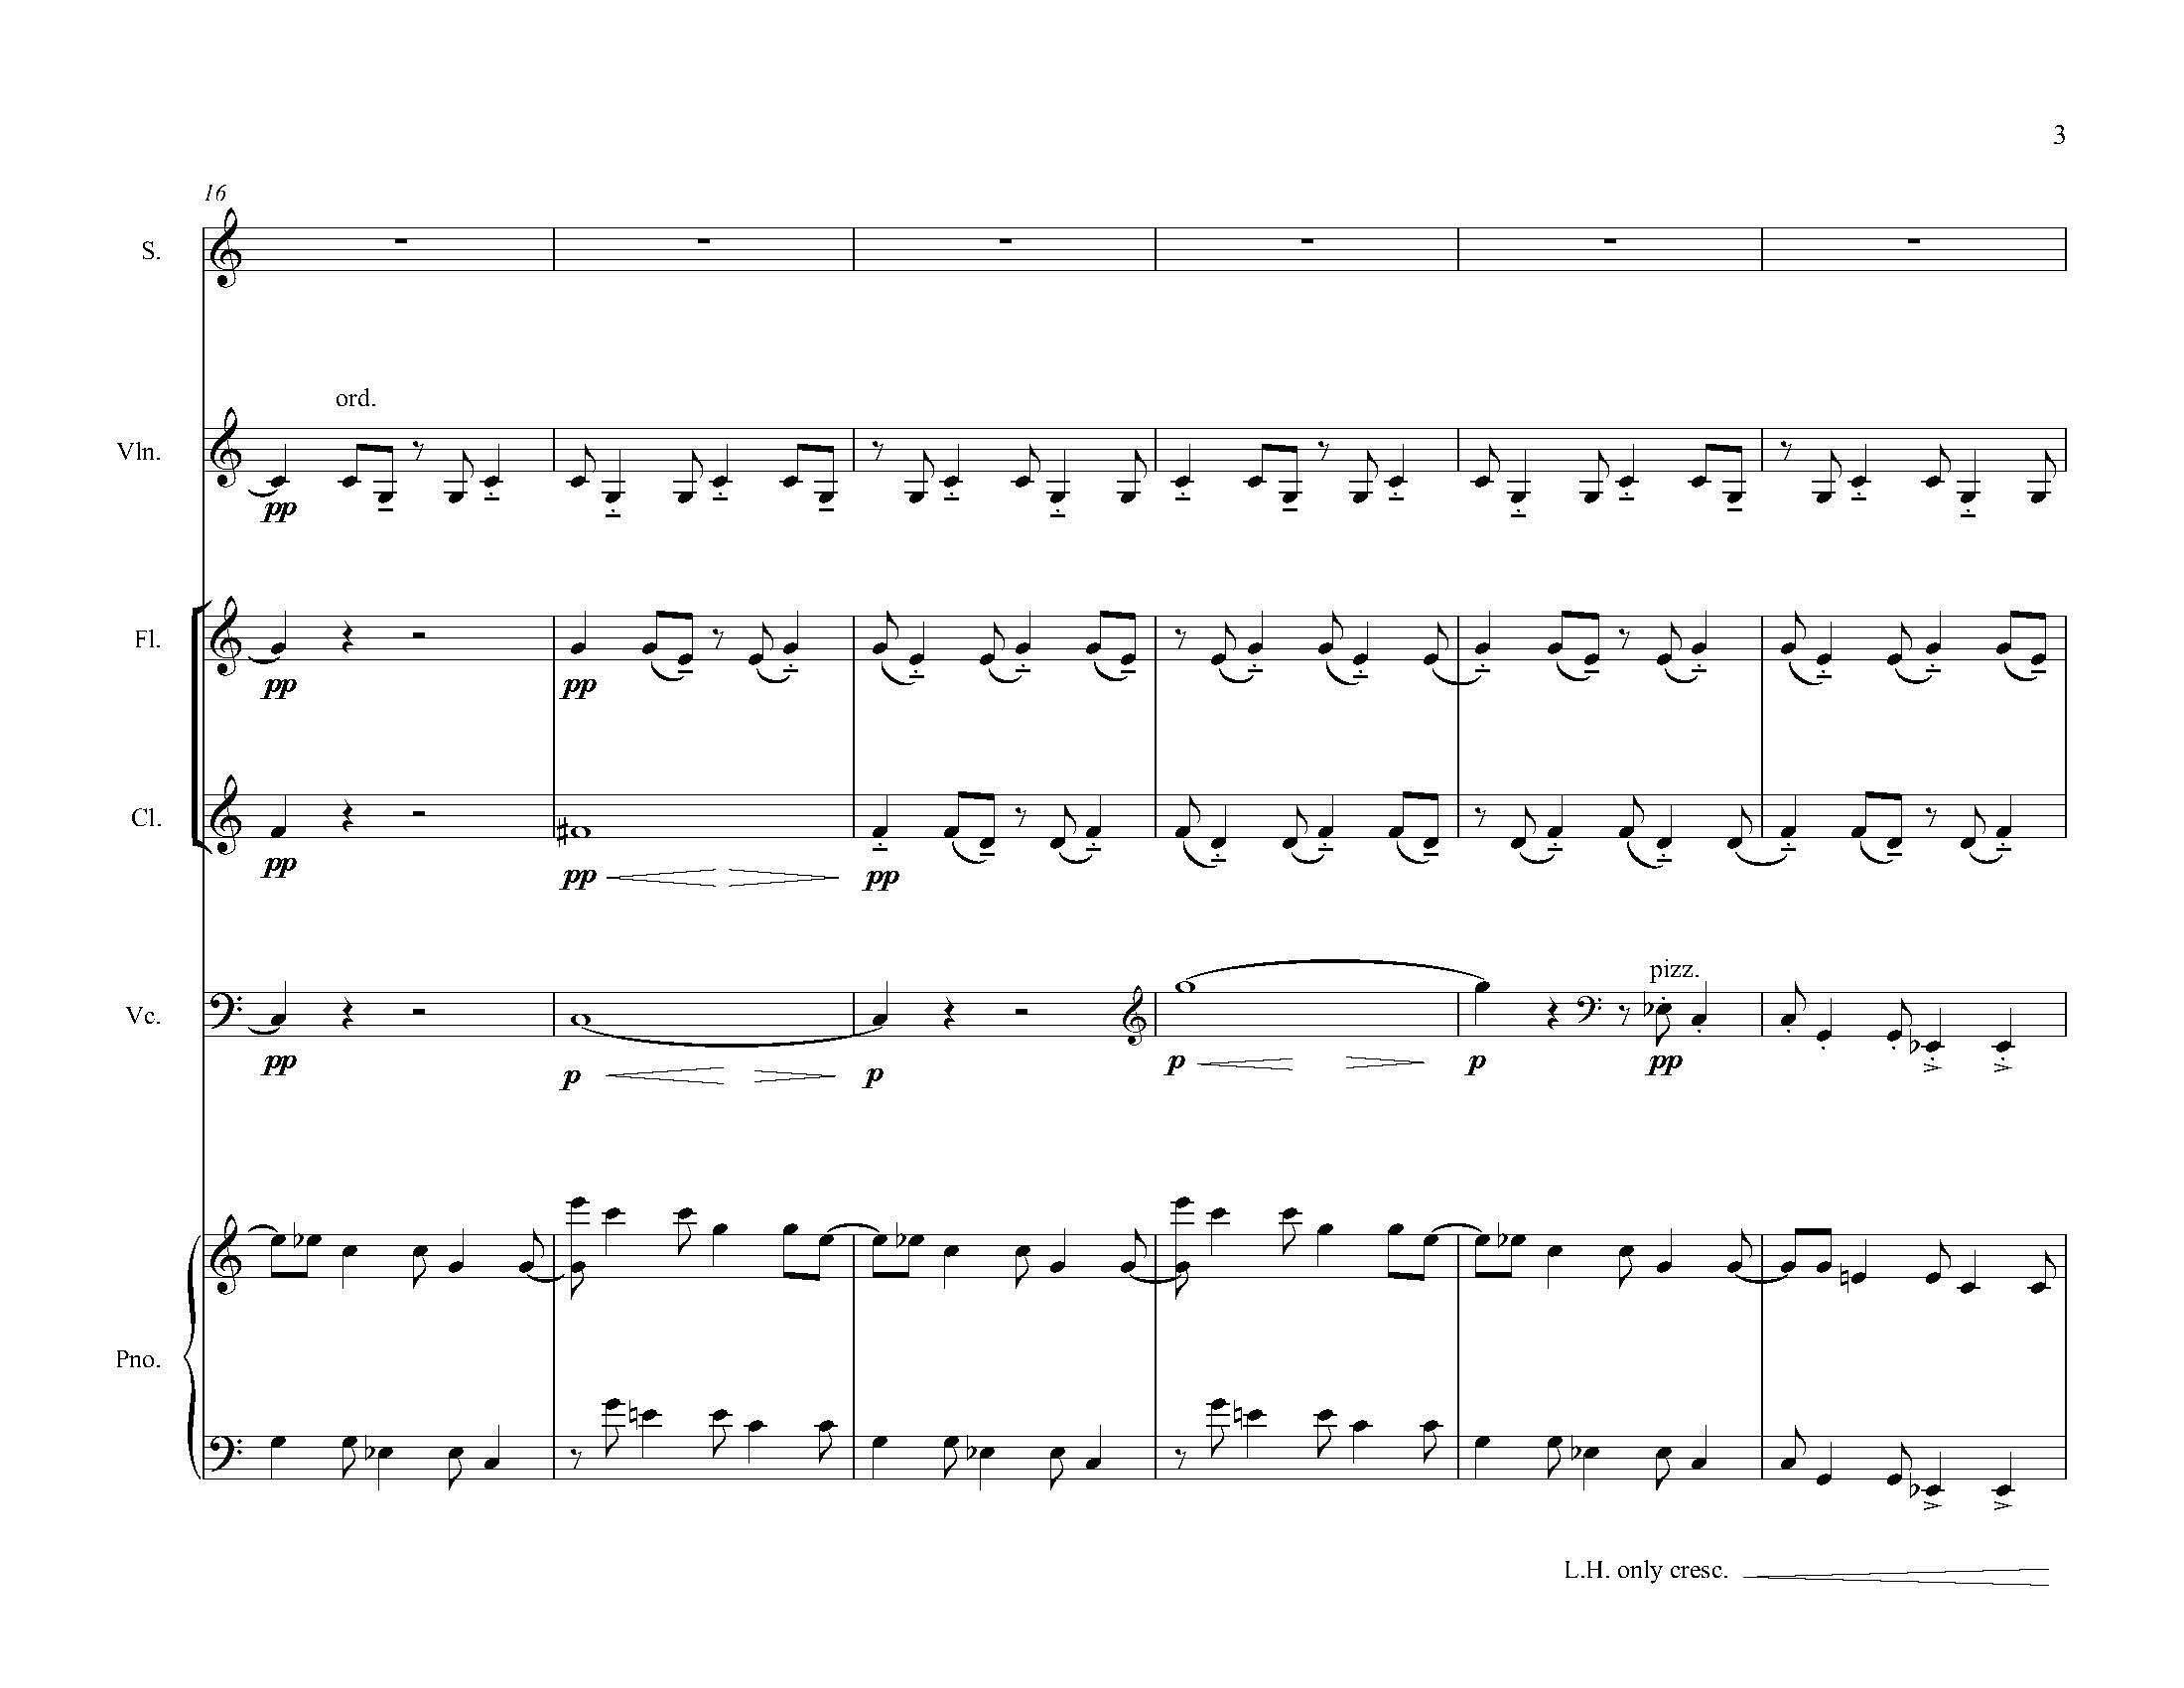 The Hill Wife - Complete Score_Page_011.jpg